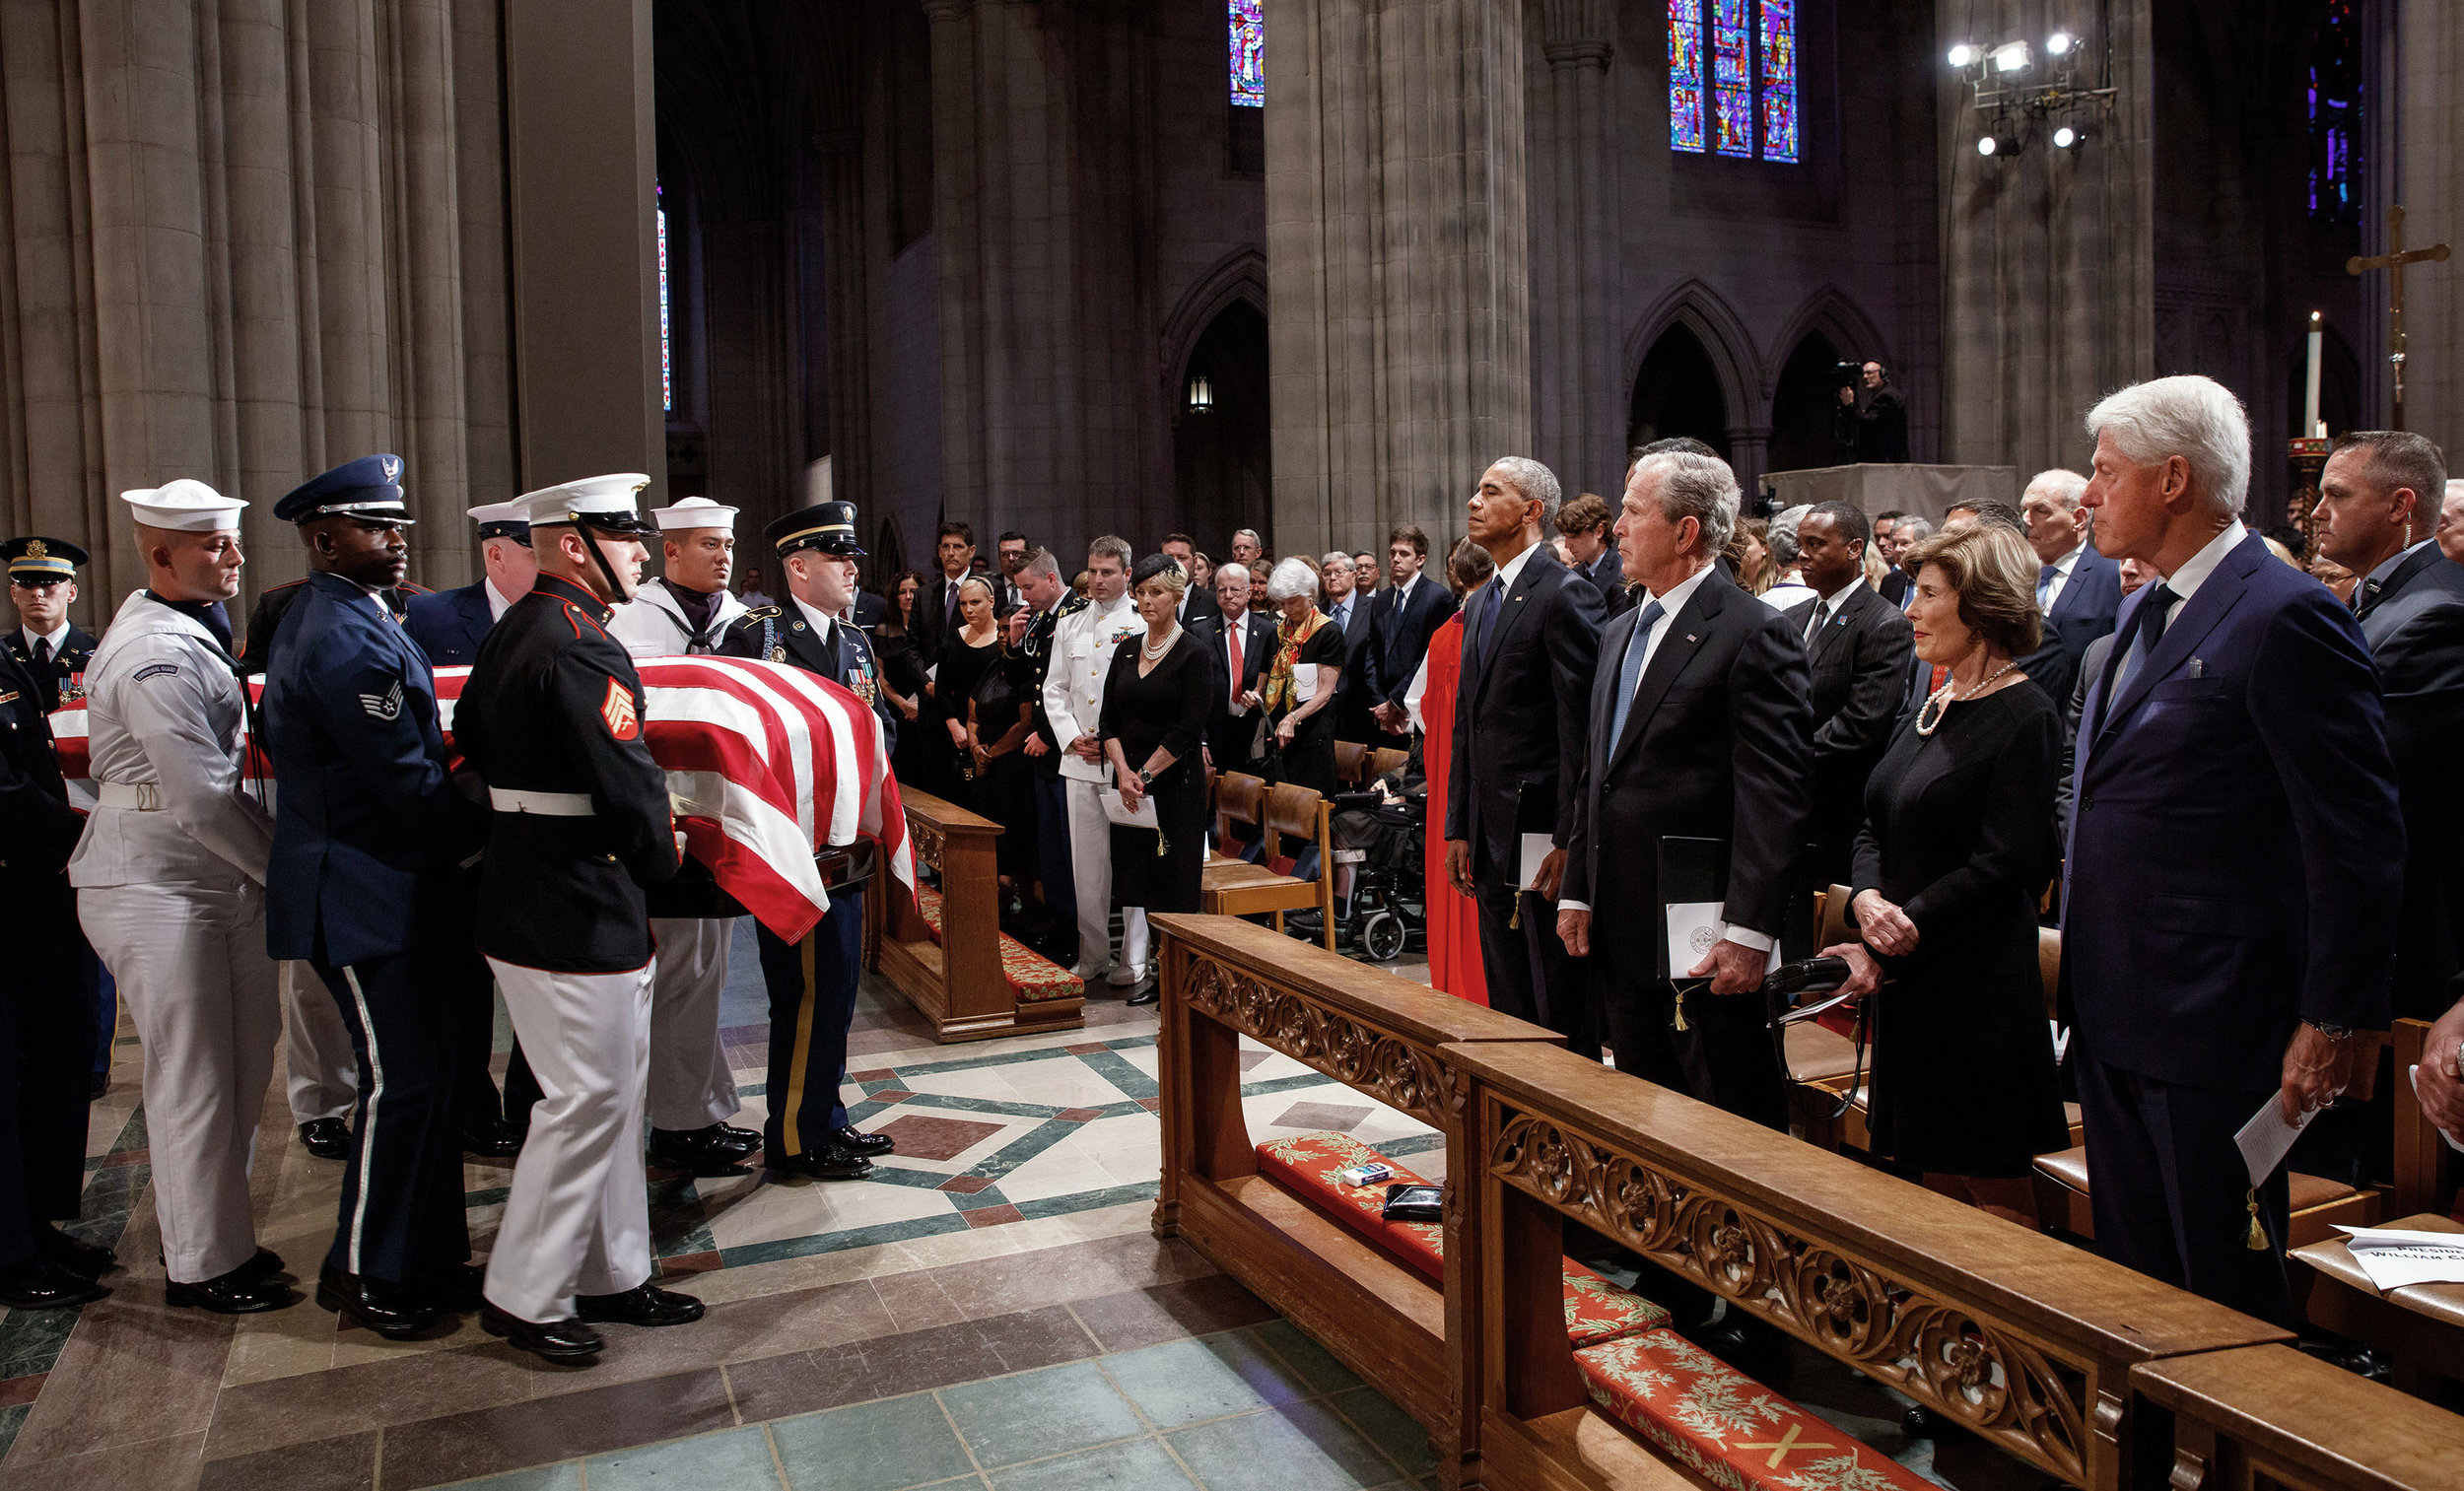  Former presidents Barack Obama, George W. Bush, and Bill Clinton watch the casket of Sen. John McCain  leave the National Cathedral in Washington, D.C. The McCain family is gathered on the other side of the aisle.  Obama and Bush, who both ran again